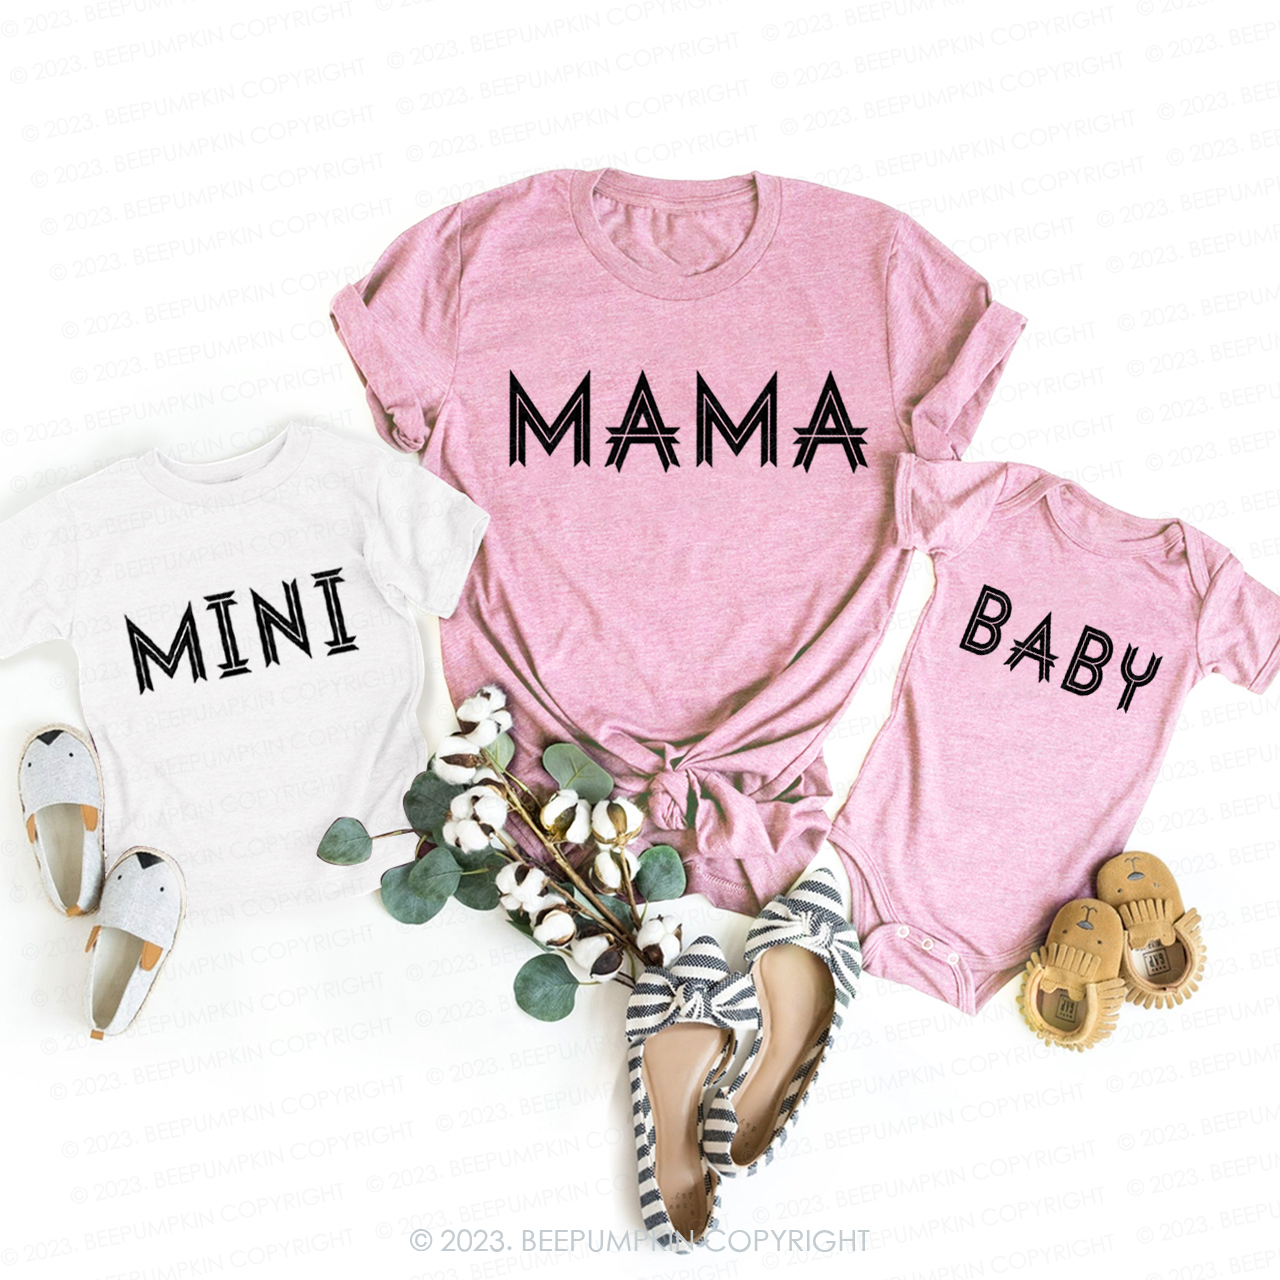 Mama Mini Square Characters T-Shirts For Mom&Me